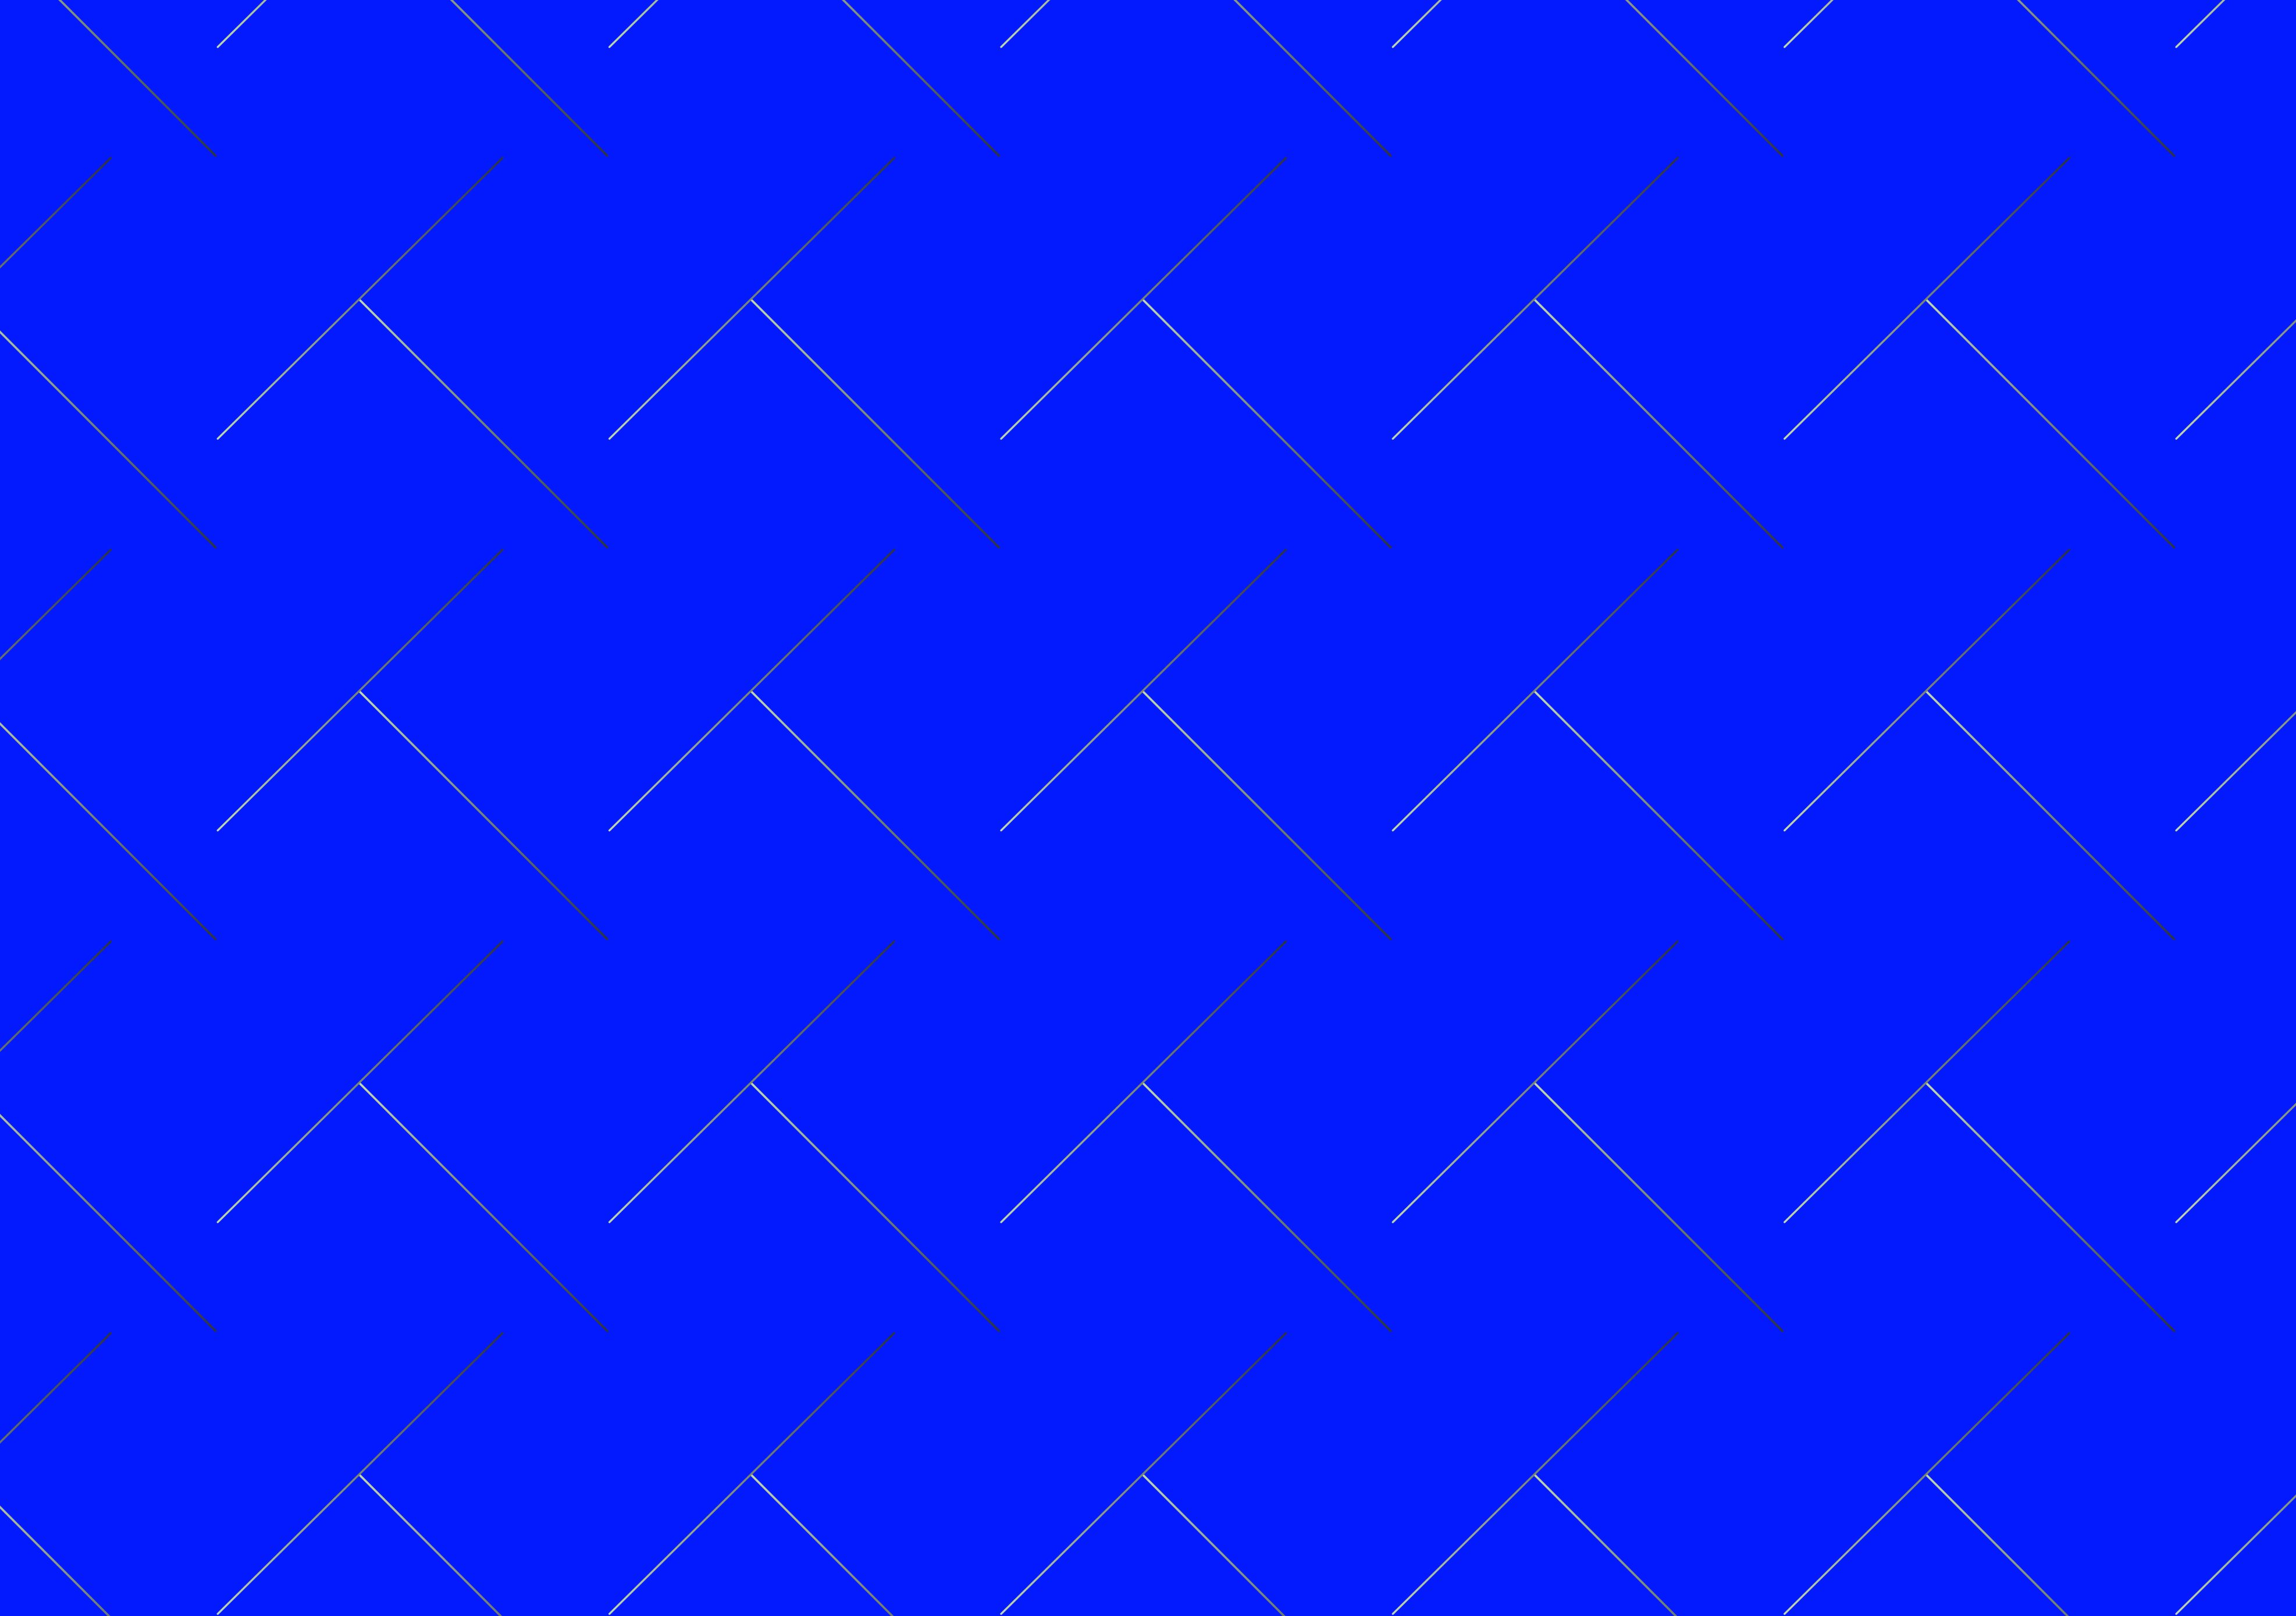 Wallpaper for mobile devices texture, blue, patterns, textures